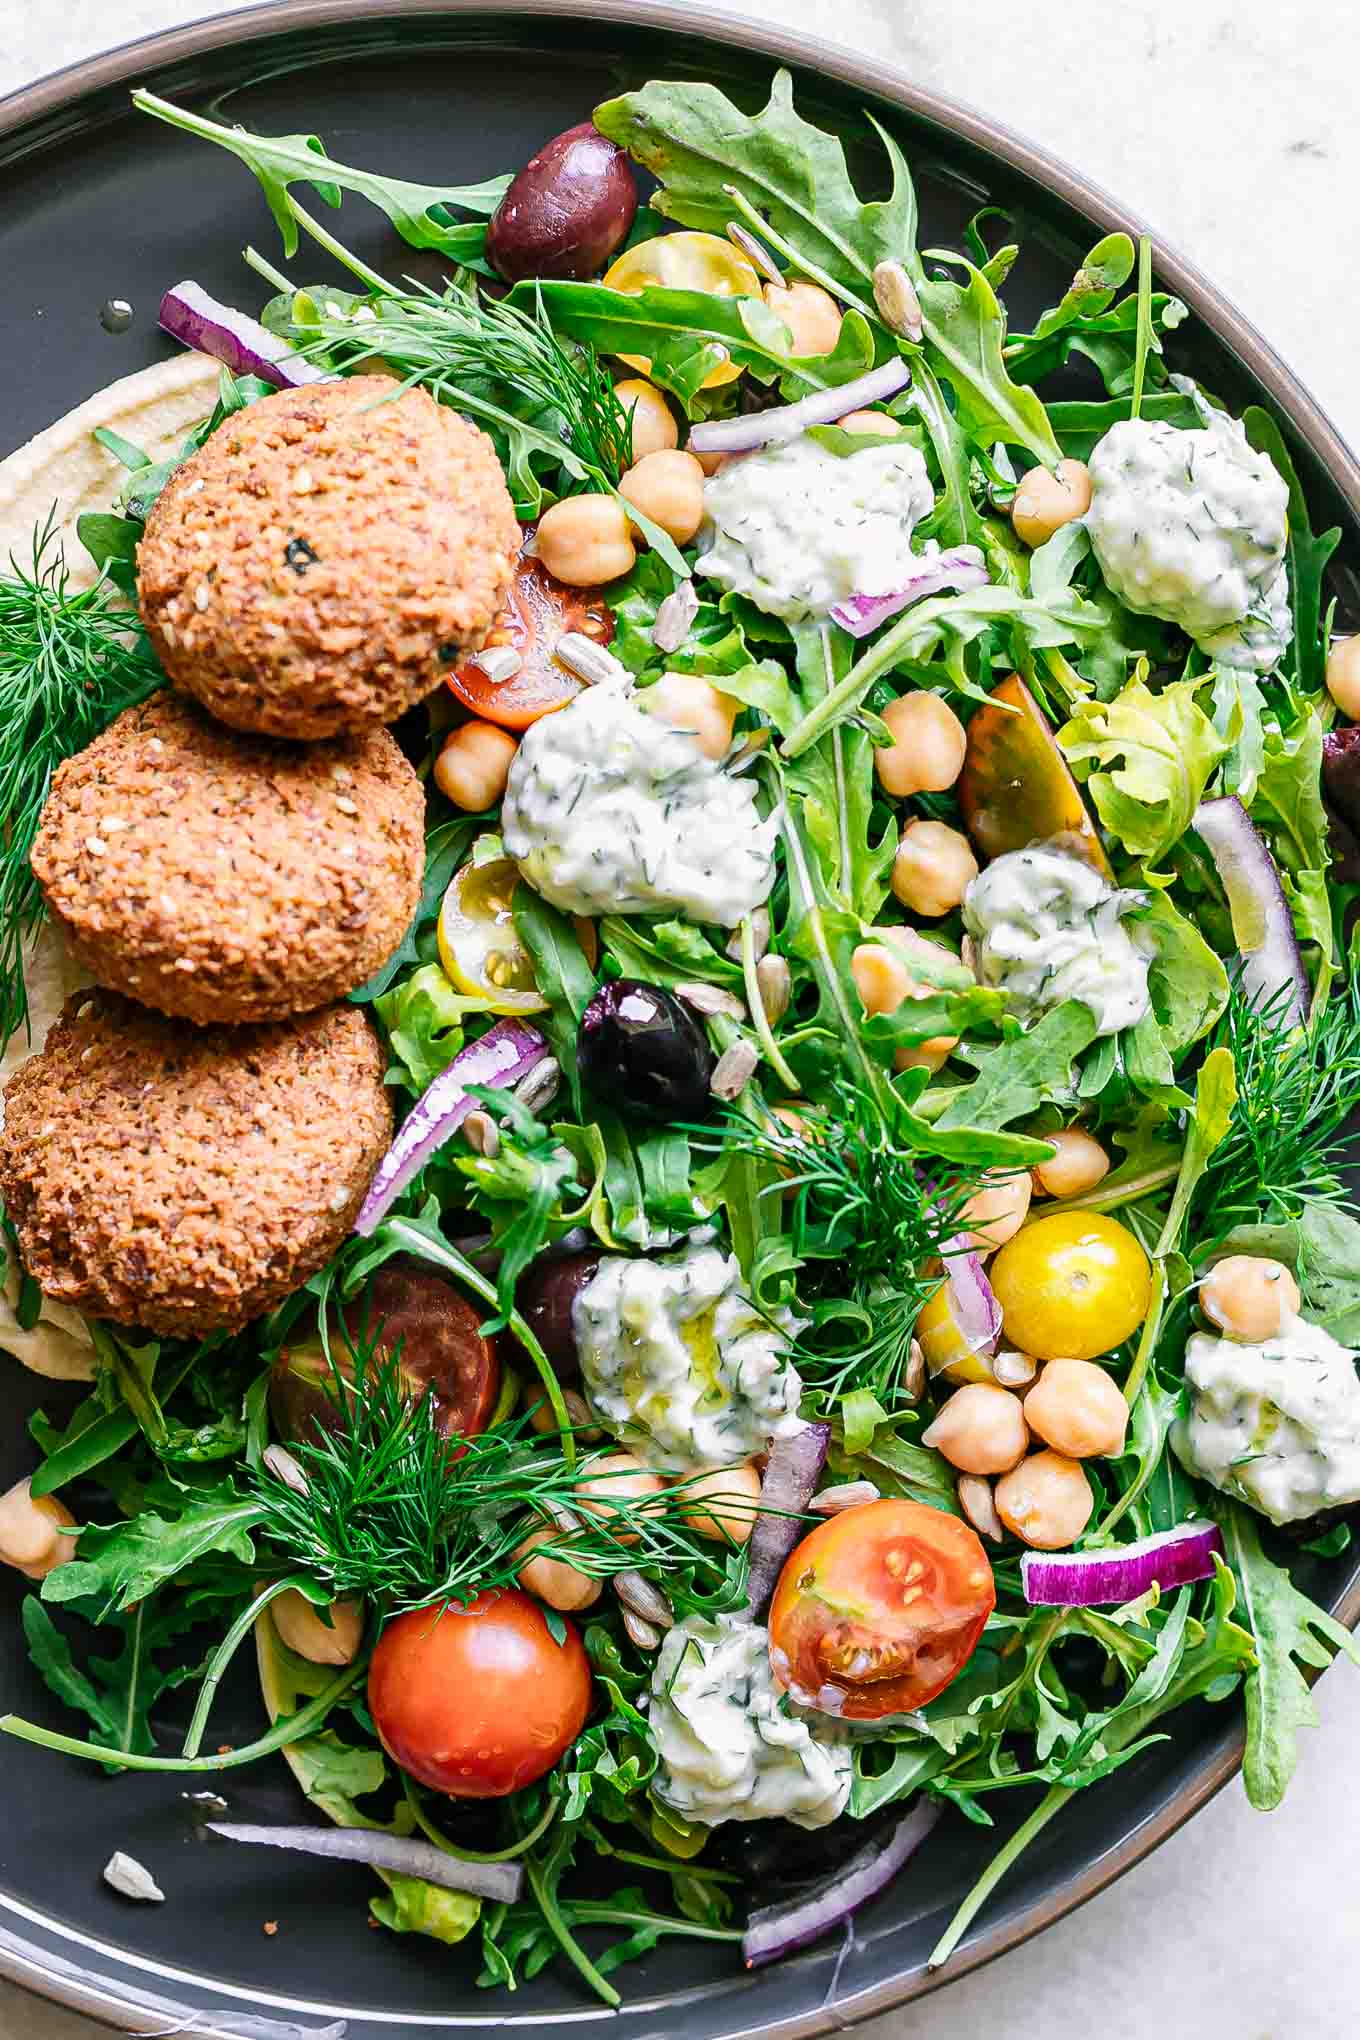 a plate with arugula salad with falafel, red onion, olives, tomatoes, tzatziki, hummus, and sunflower seeds